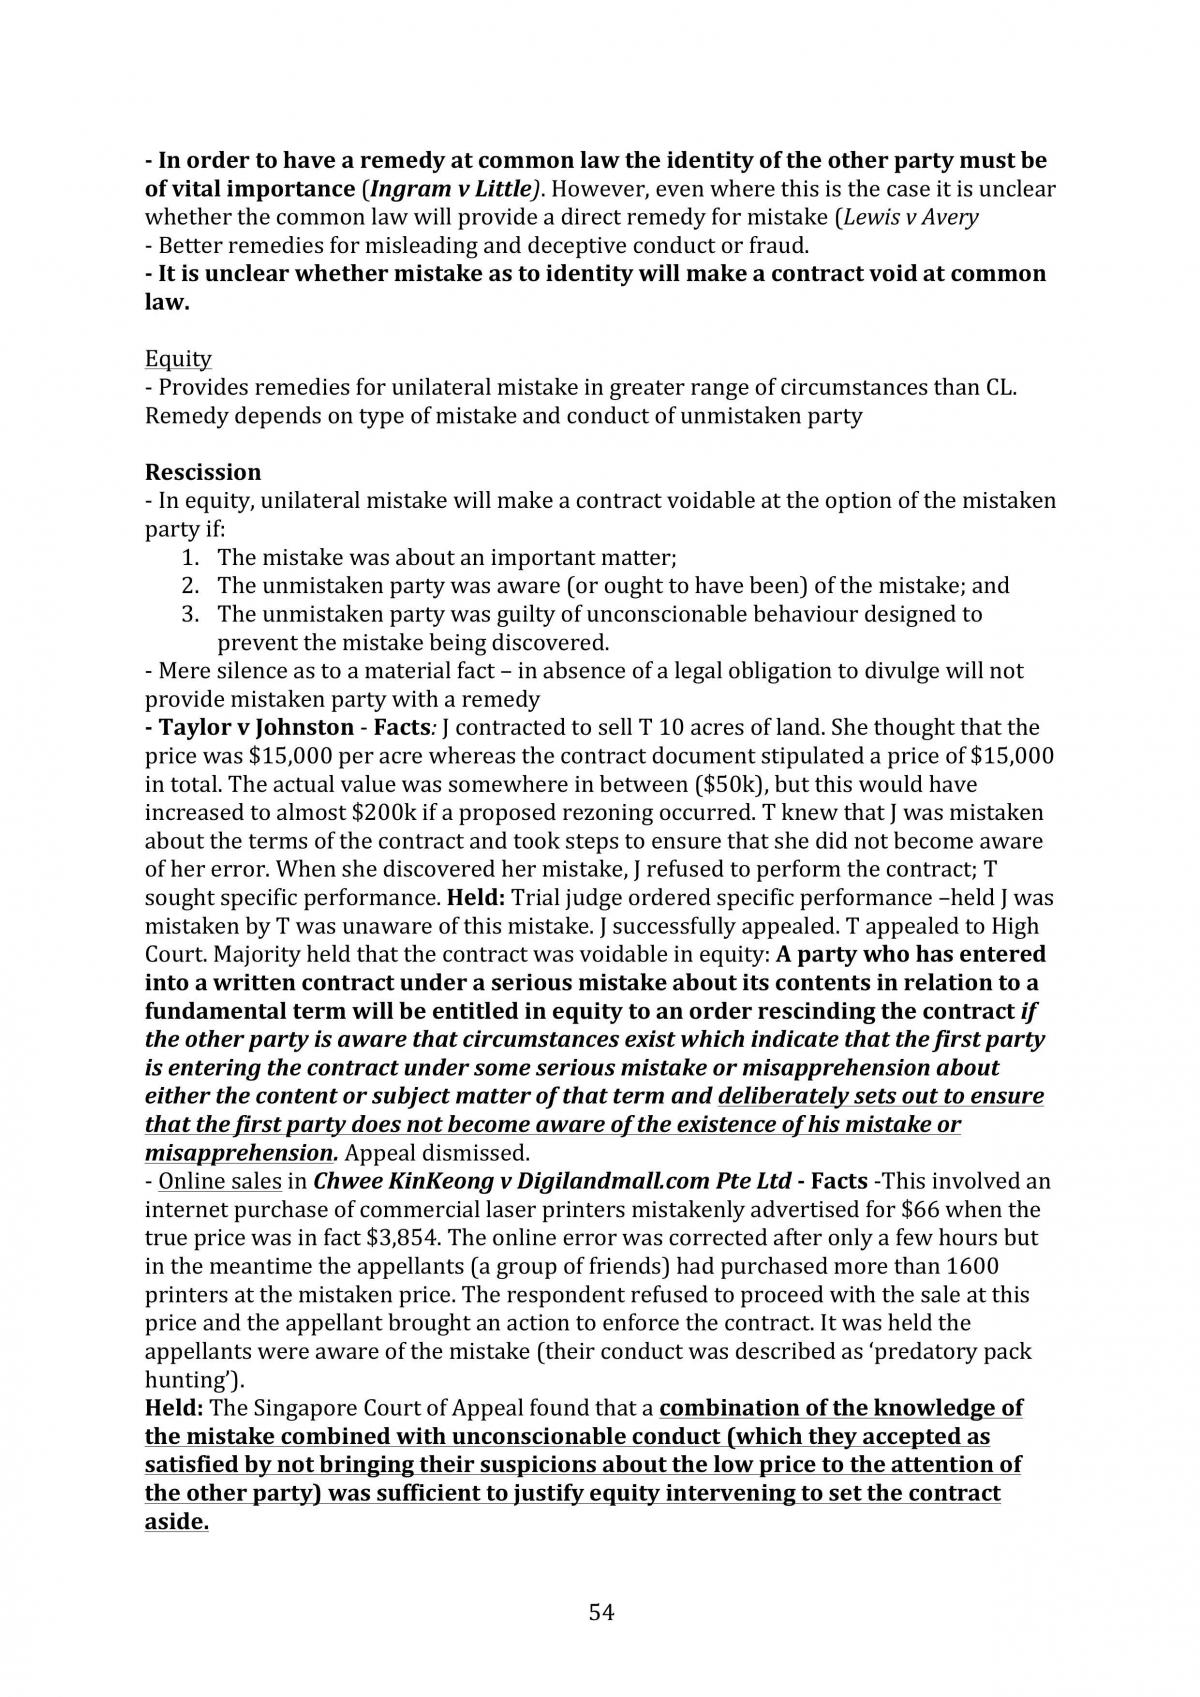 Contract Law Study/Exam Notes  - Page 54